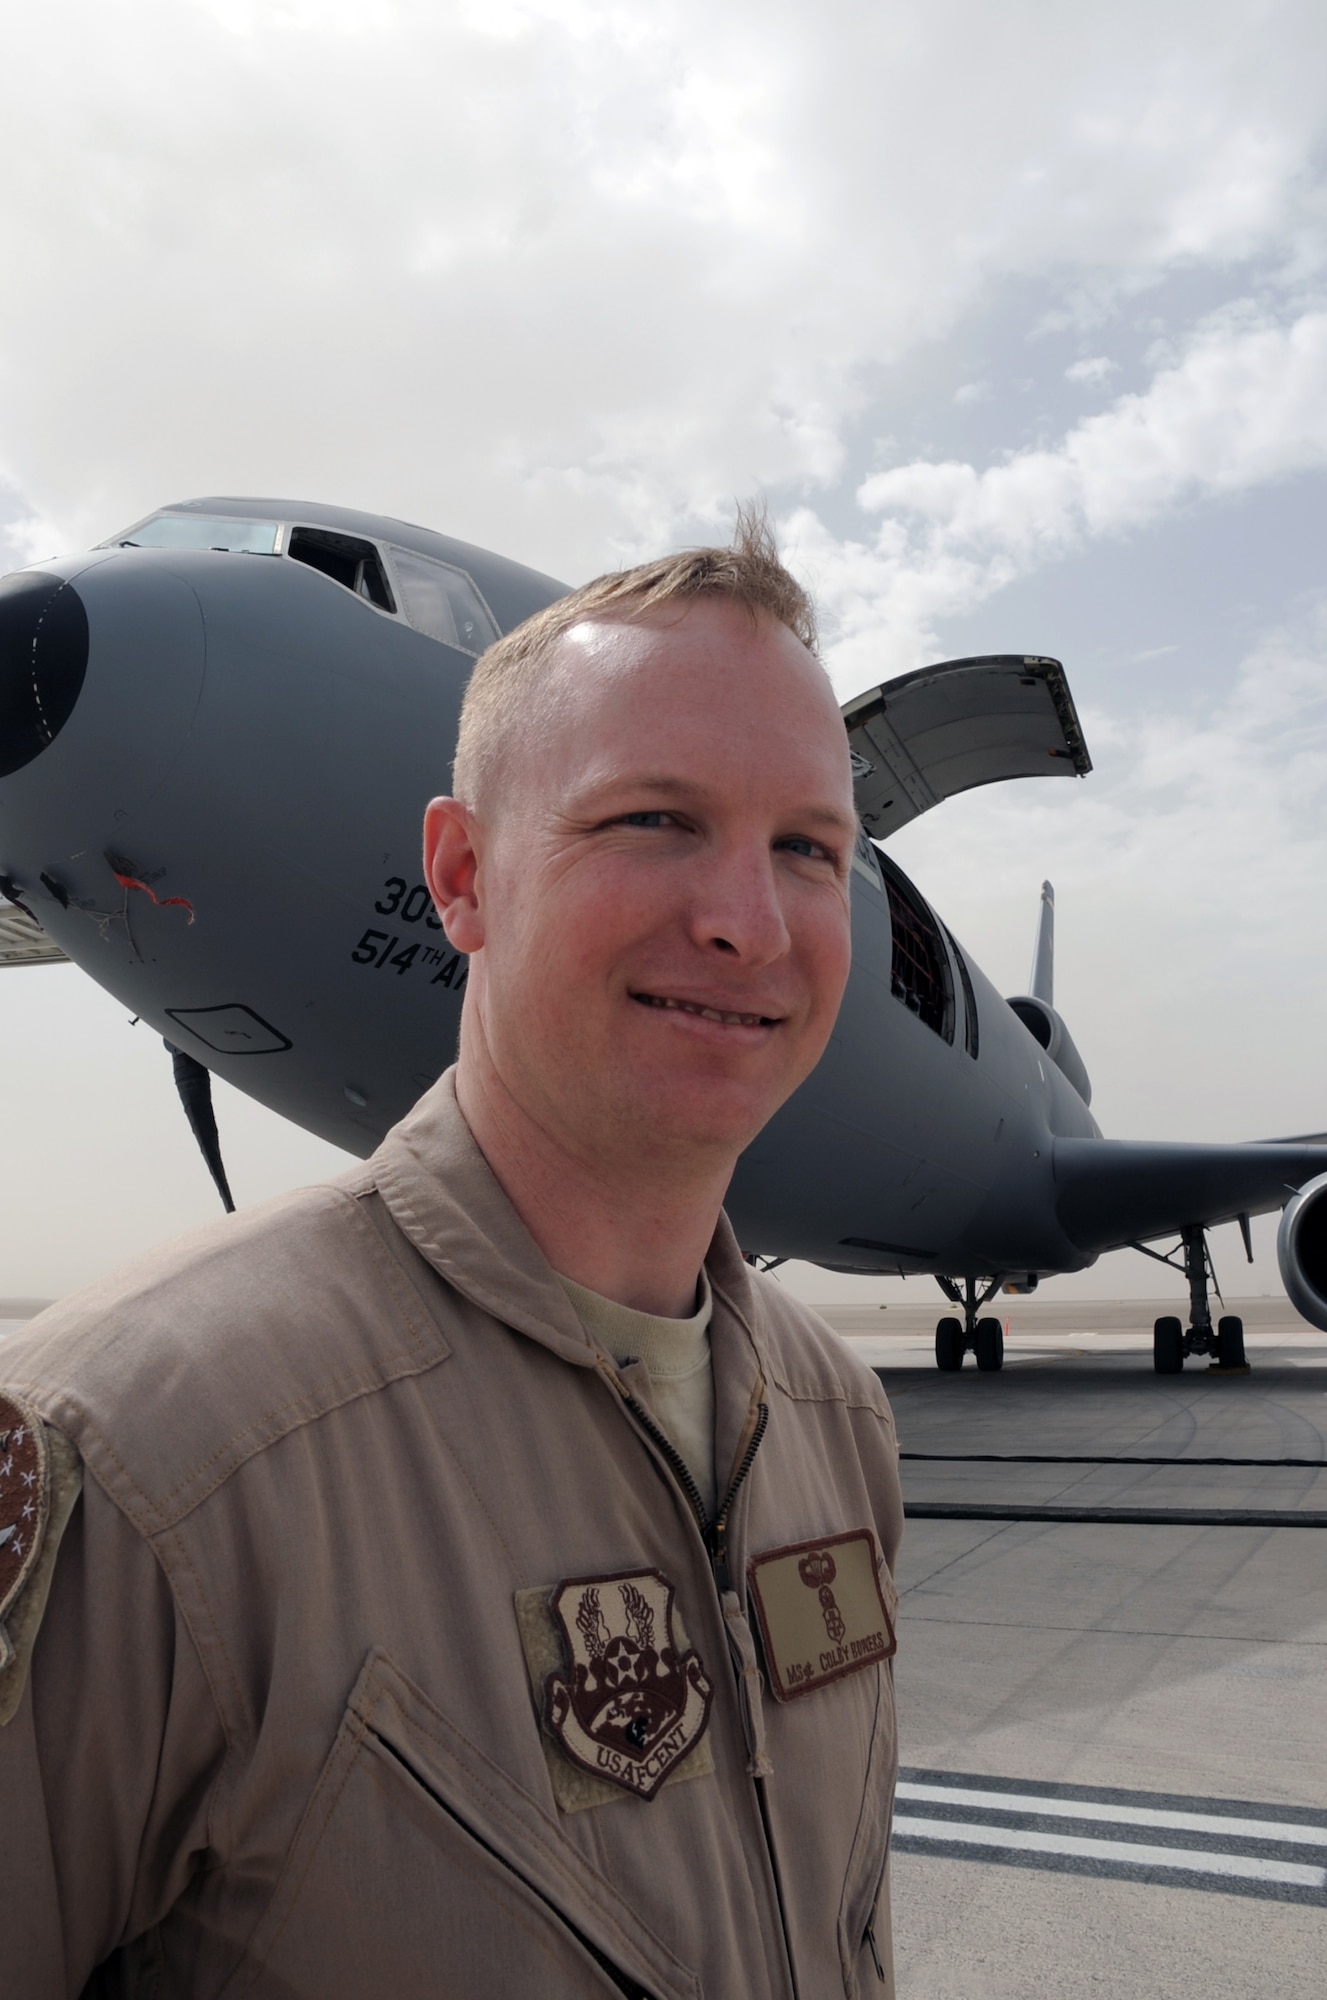 Master Sgt. Colby Bowers is an independent duty medical technician assigned to the 908th Expeditionary Air Refueling Squadron at a non-disclosed base in Southwest Asia. Here he is pictured by a KC-10 Extender on March 1, 2010. He is deployed from the U.S. Air Force Expeditionary Center's 421st Combat Training Squadron at Joint Base McGuire-Dix-Lakehurst, N.J. (U.S. Air Force Photo/Master Sgt. Scott T. Sturkol)